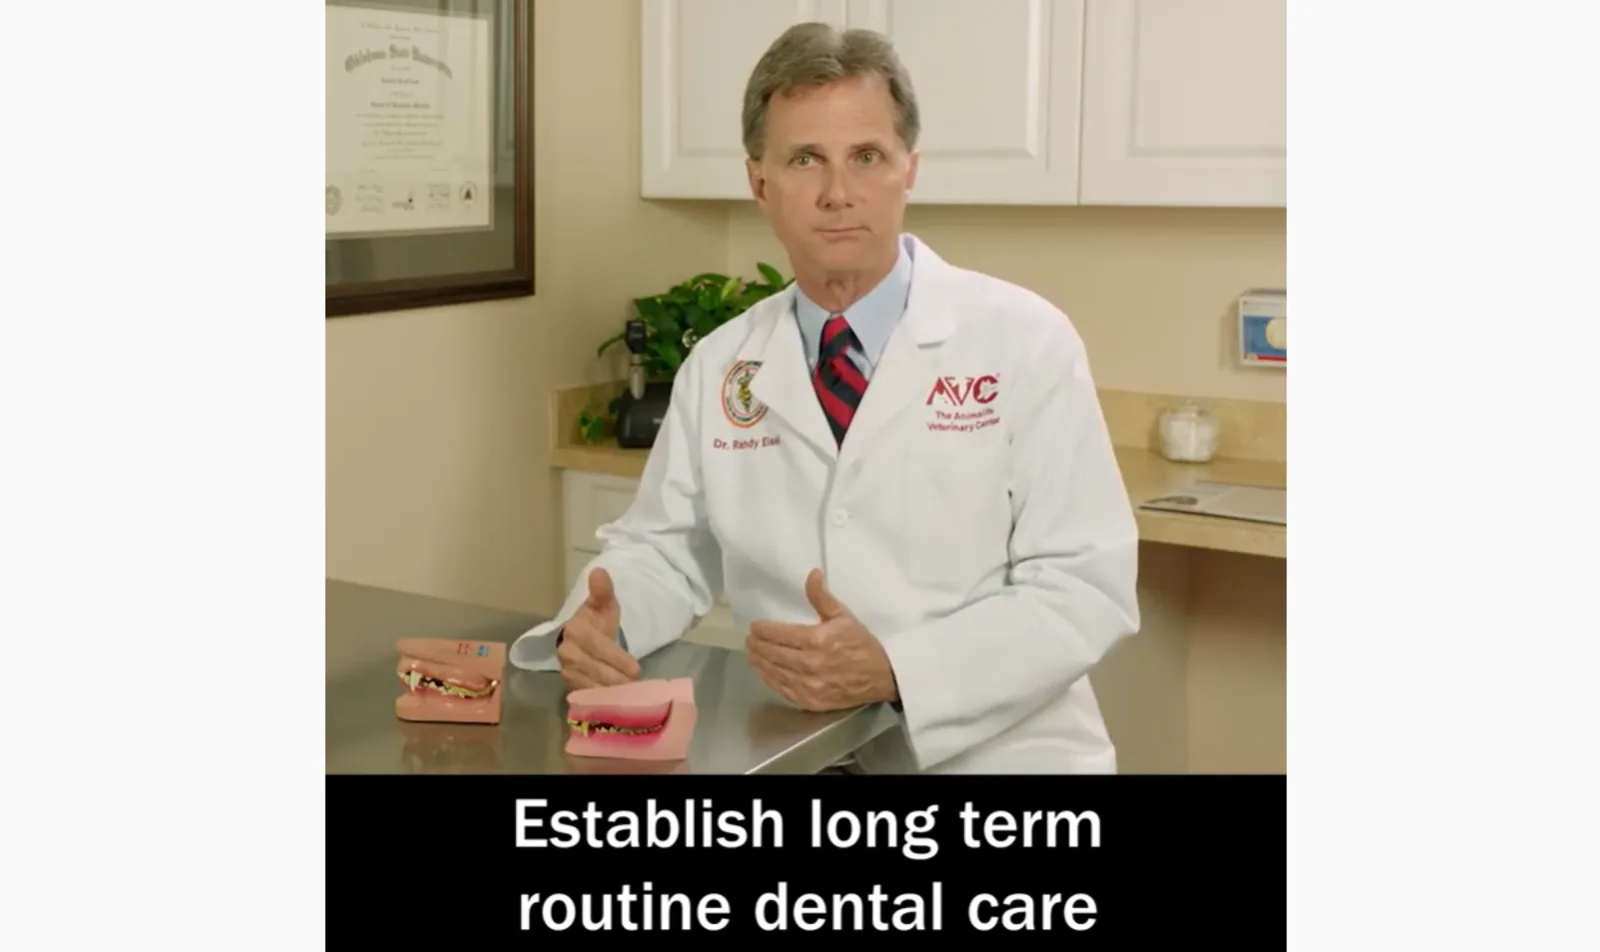 Youtube video of Dr. Eisel speaking about animal teeth cleaning